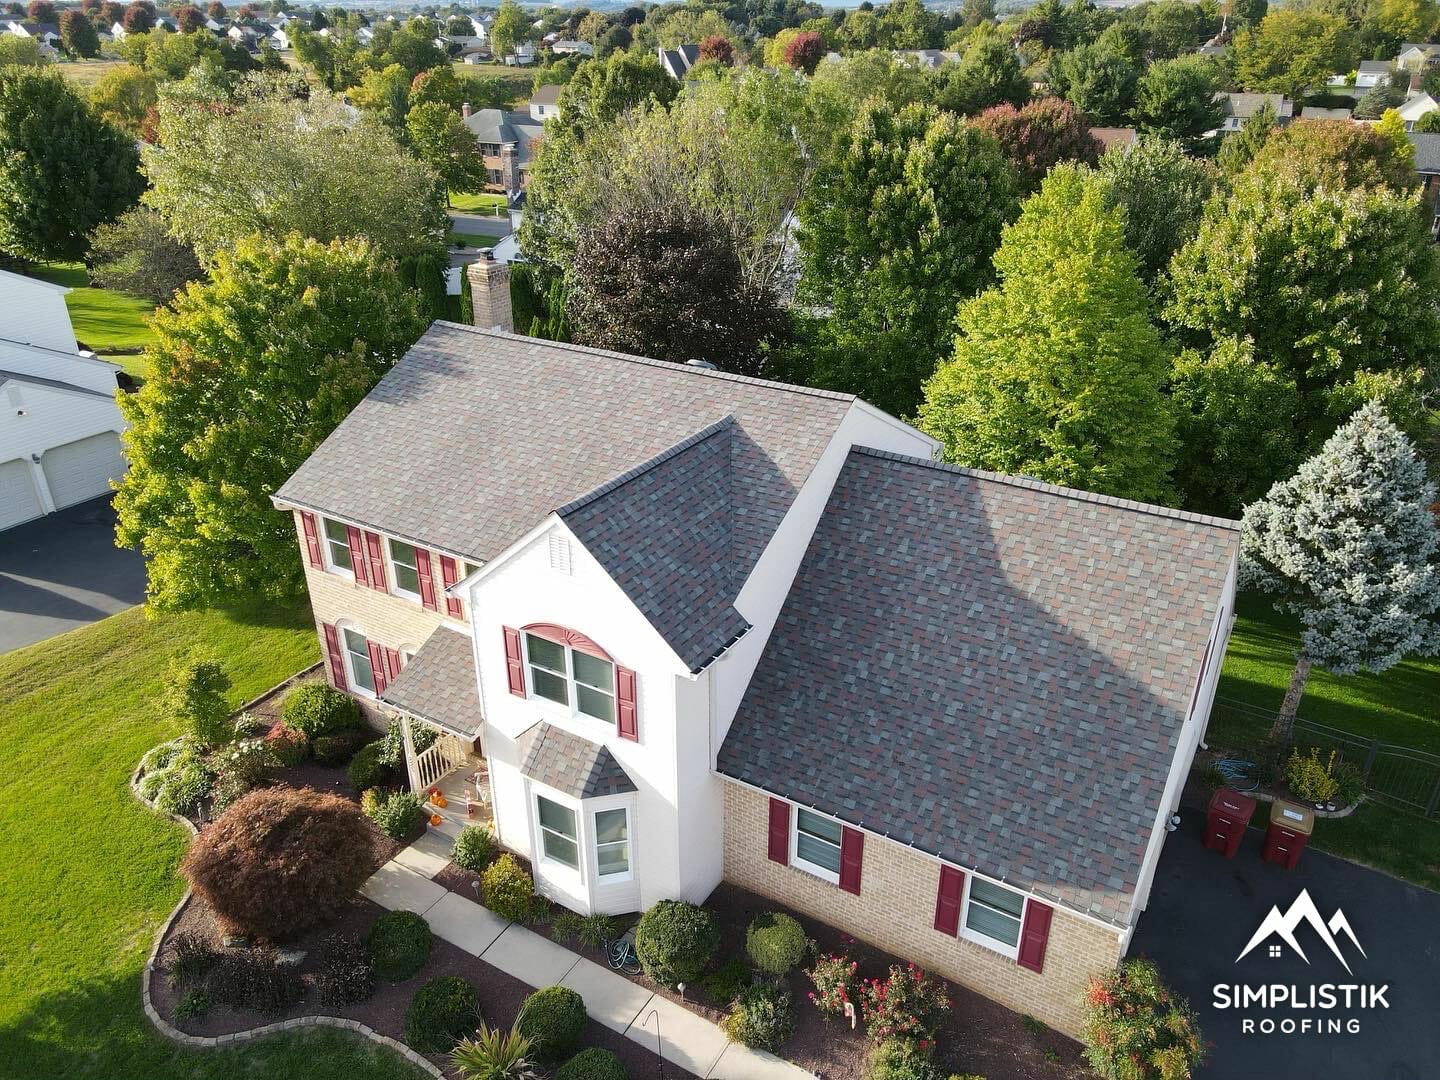 Simplistik Roofing - Completed Roofing Project Drone Shot 17